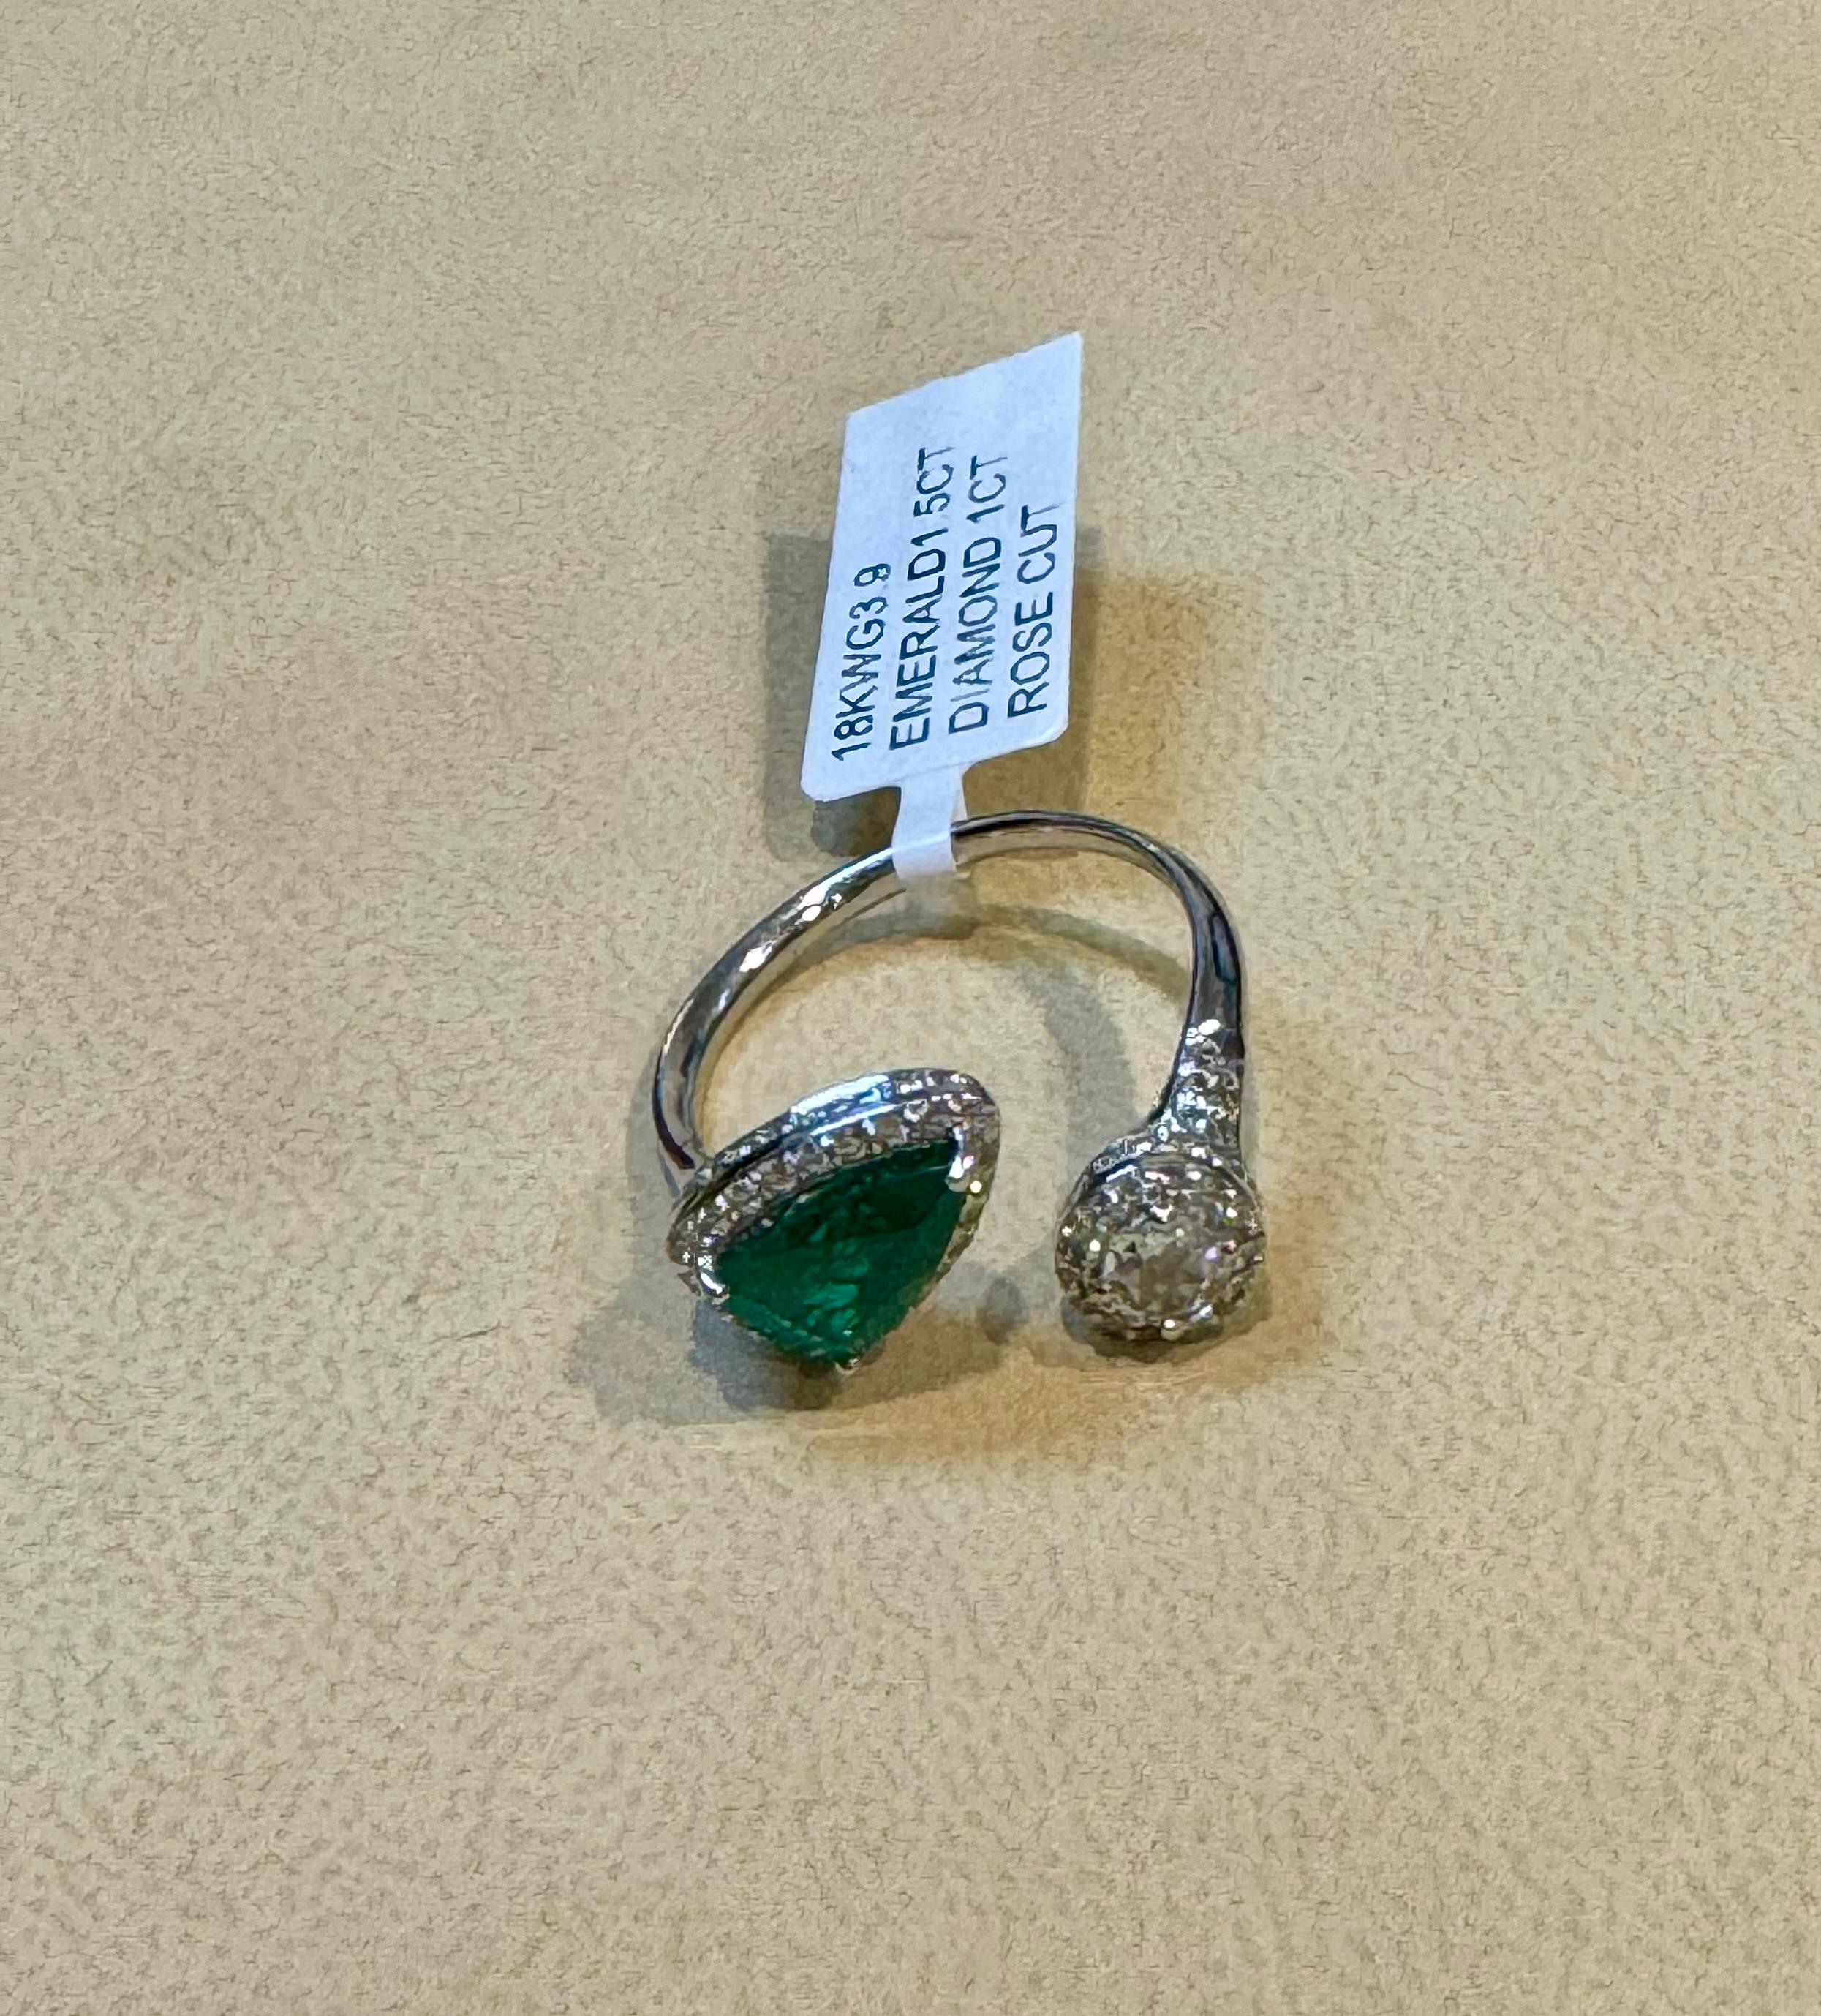 1.5 Ct Finest Colombian Pear Emerald & 1 Ct Diamond Ring in 18 Kt Gold Size 8 In Excellent Condition For Sale In New York, NY